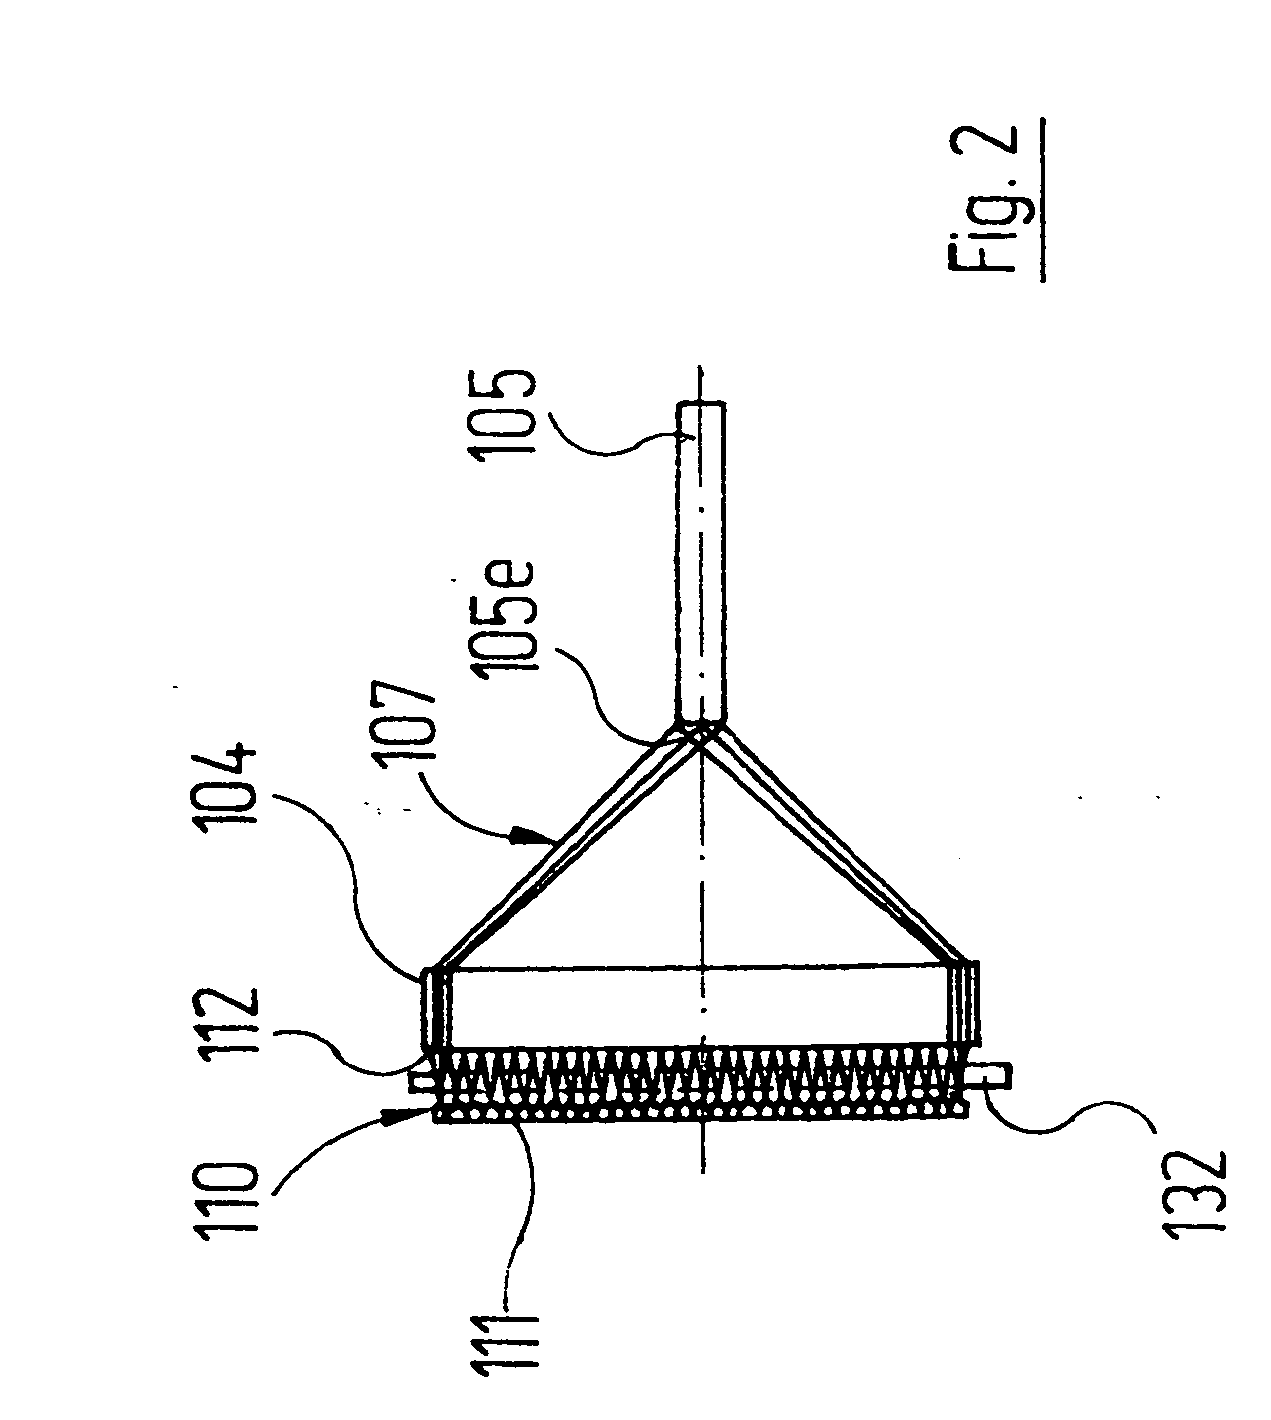 Optical apparatus for illuminating an object